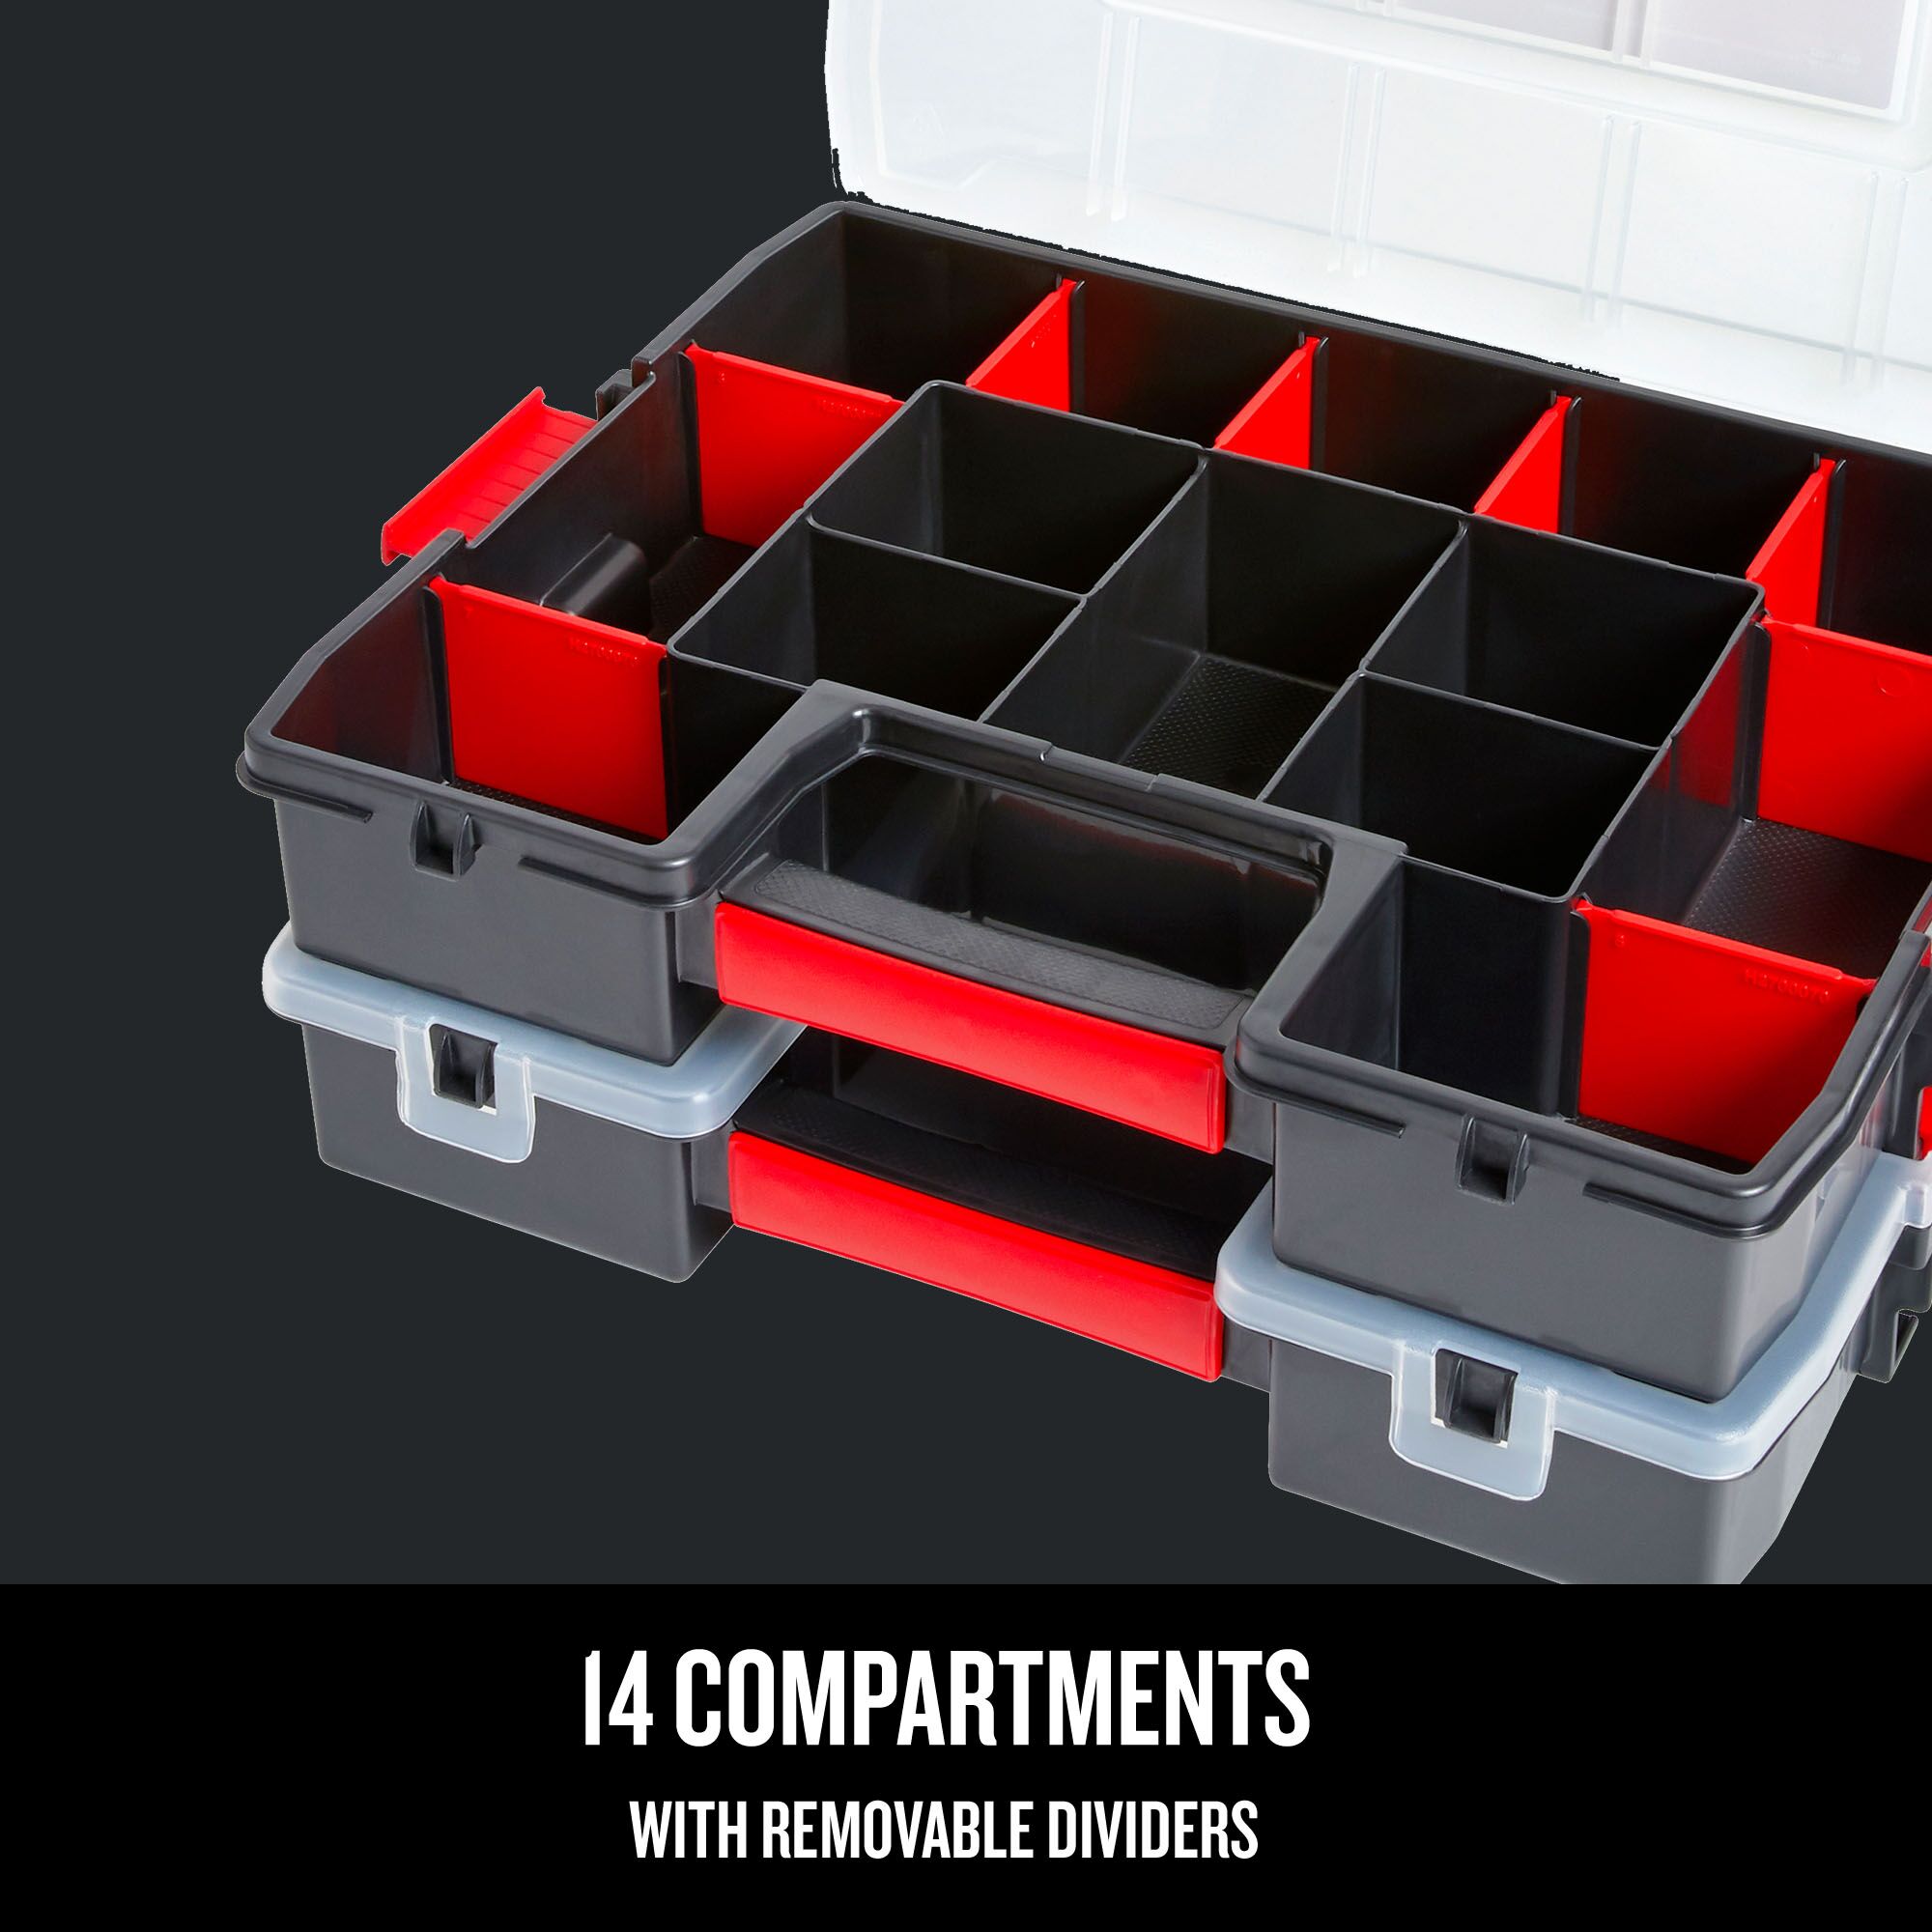 Graphic of CRAFTSMAN Storage: Part Organizers highlighting product features